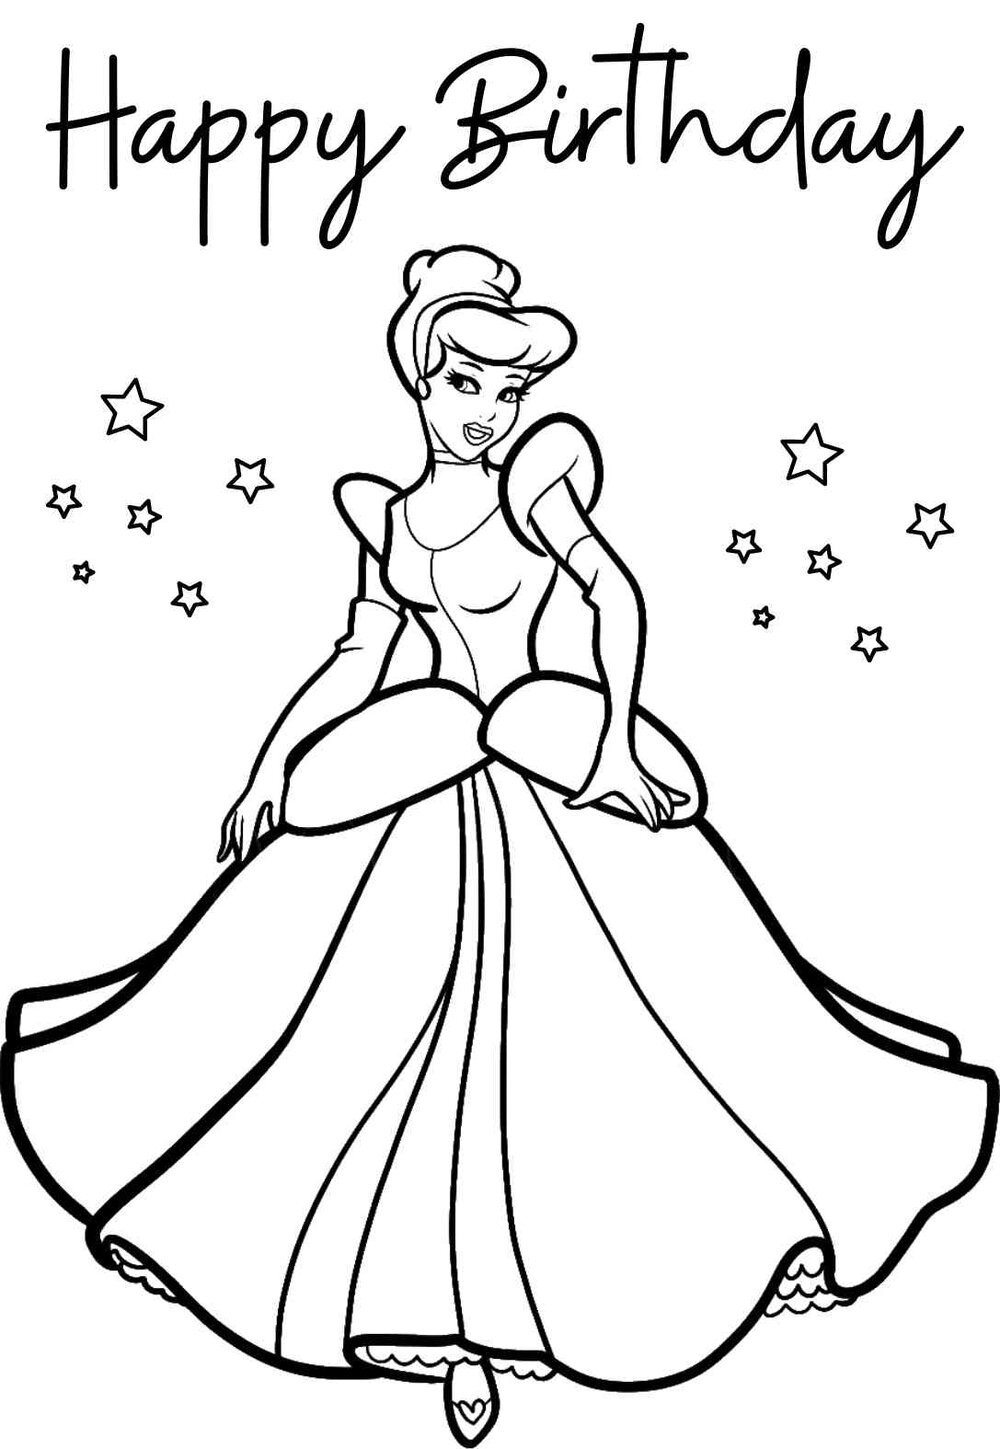 11 beautiful princess birthday coloring pages cards free printbirthday cards